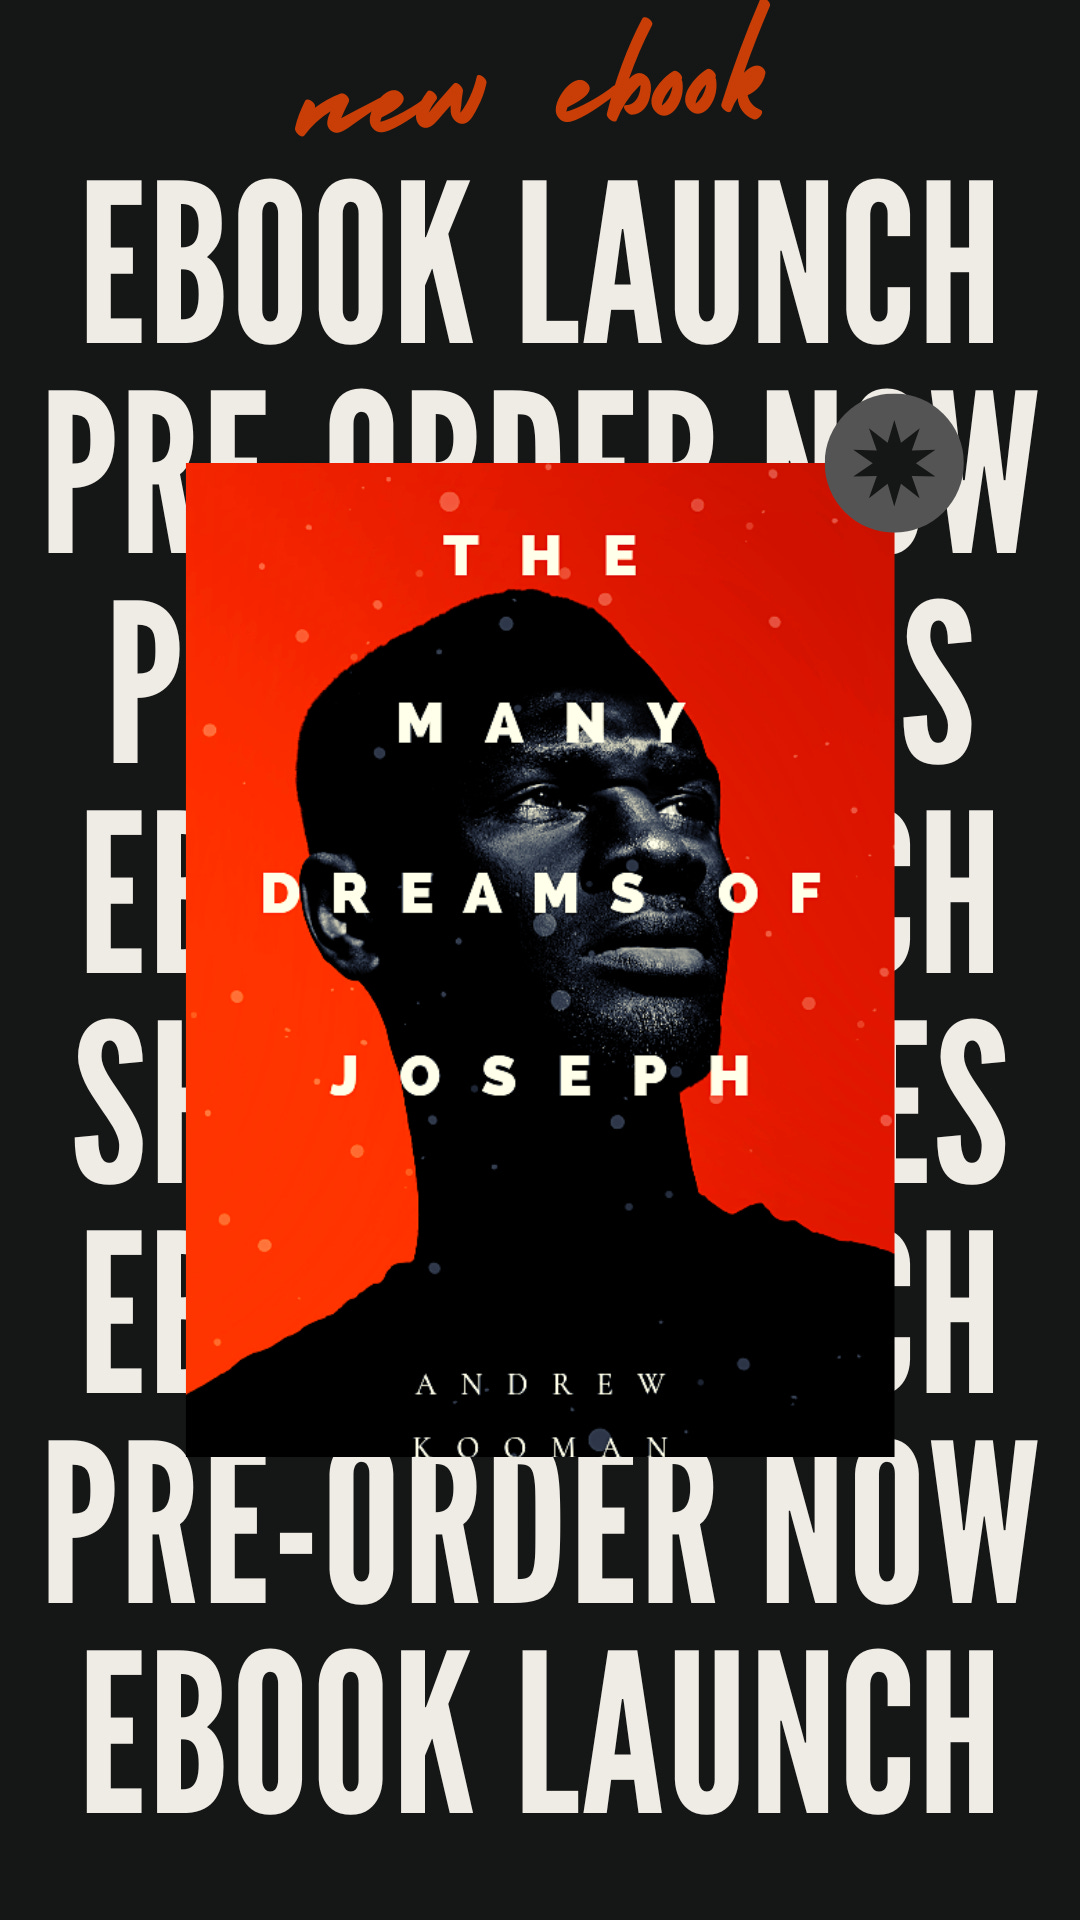 The Many Dreams of Joseph - E book now available on Amazon